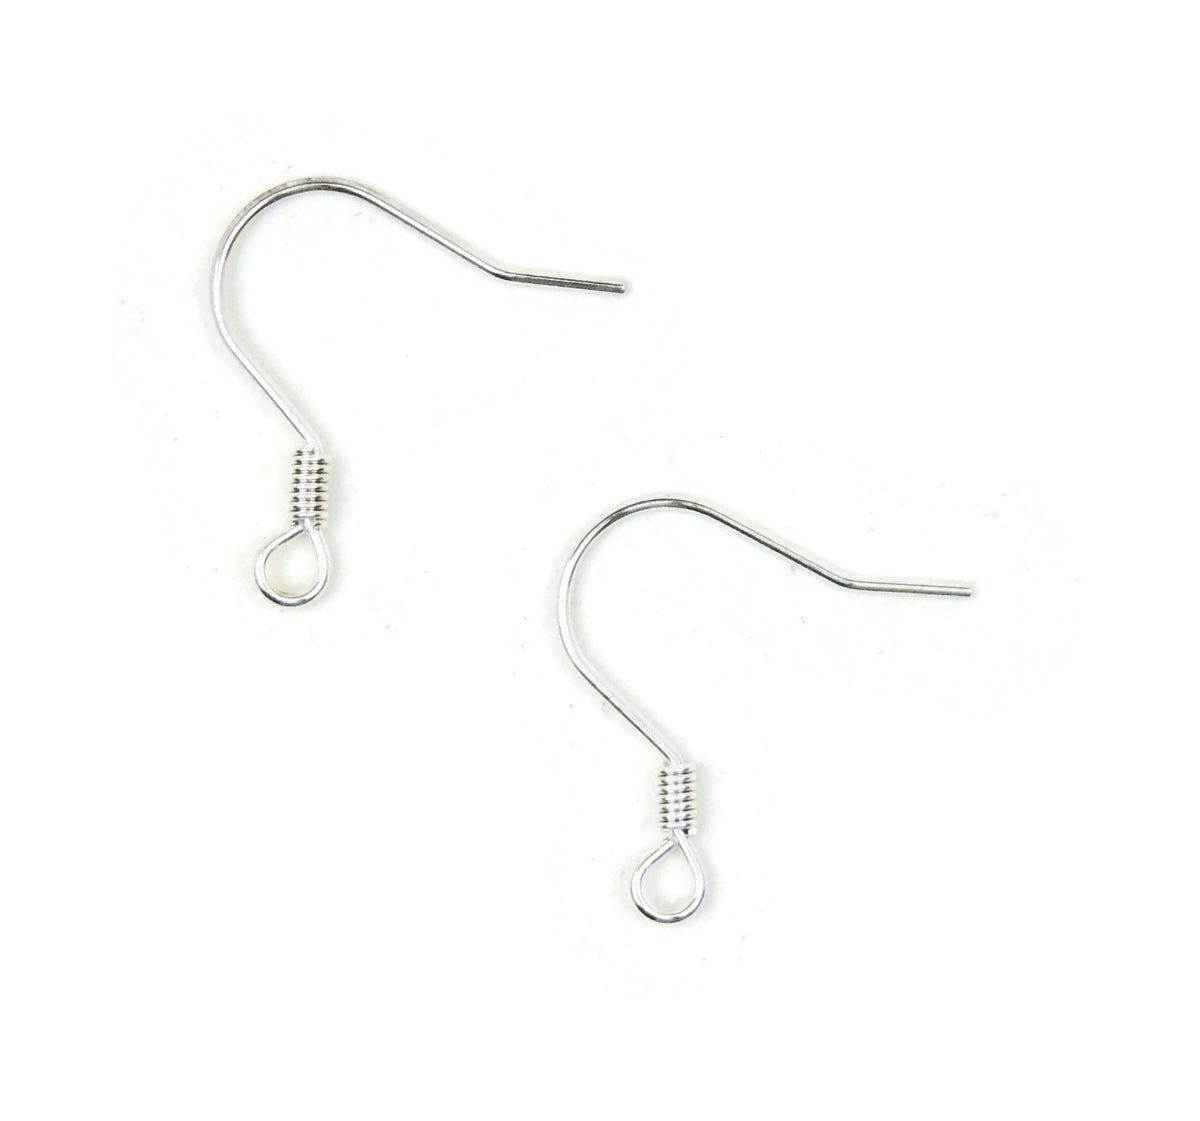 ALMA BEADS Silver Plated Ear Wires Spiral Ends 18 mm 10 pcs